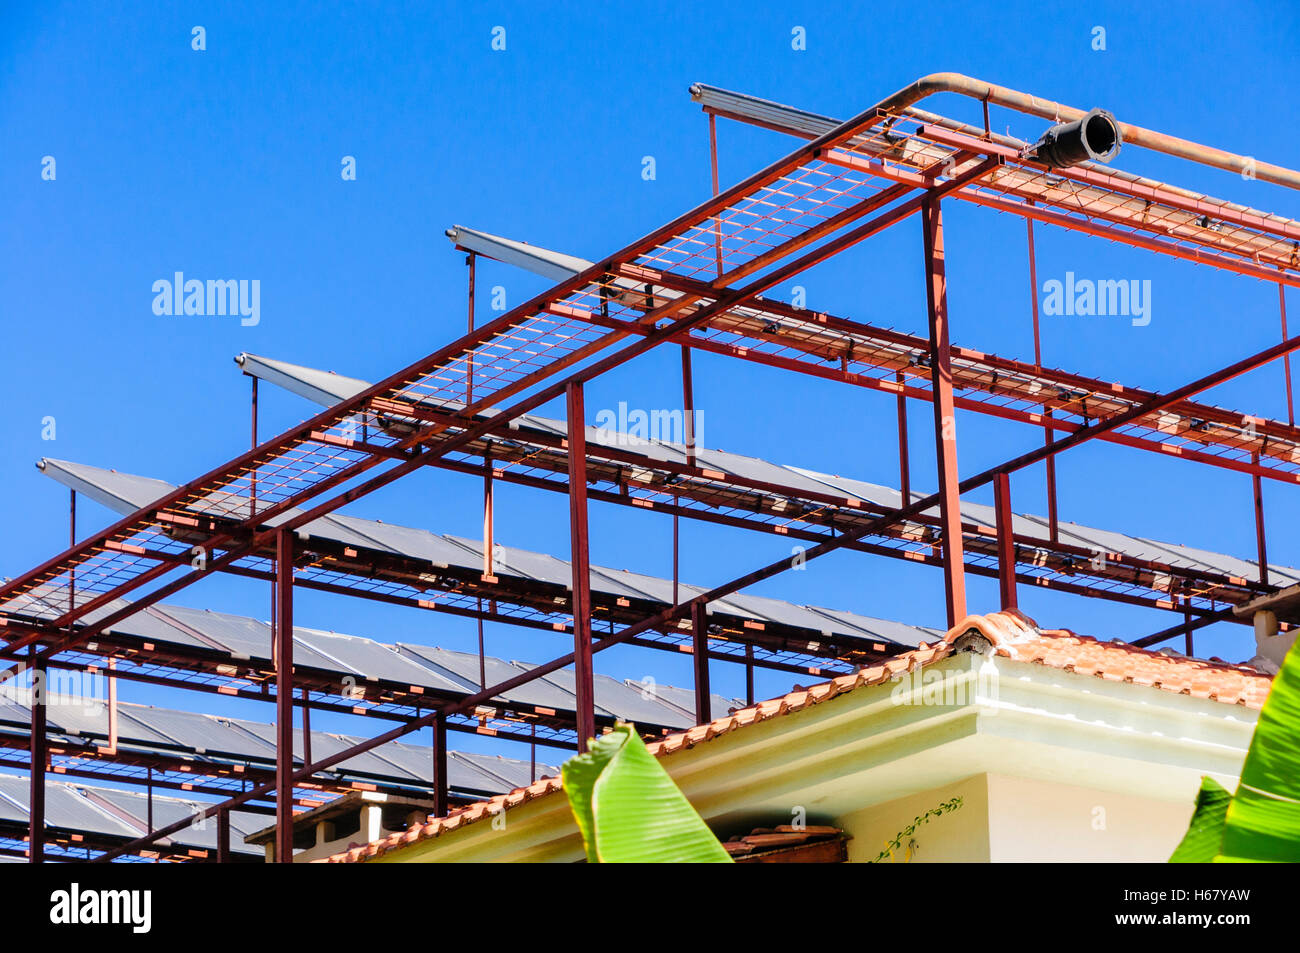 Solar panels on a metal frame on the roof of a building in a hot climate Stock Photo